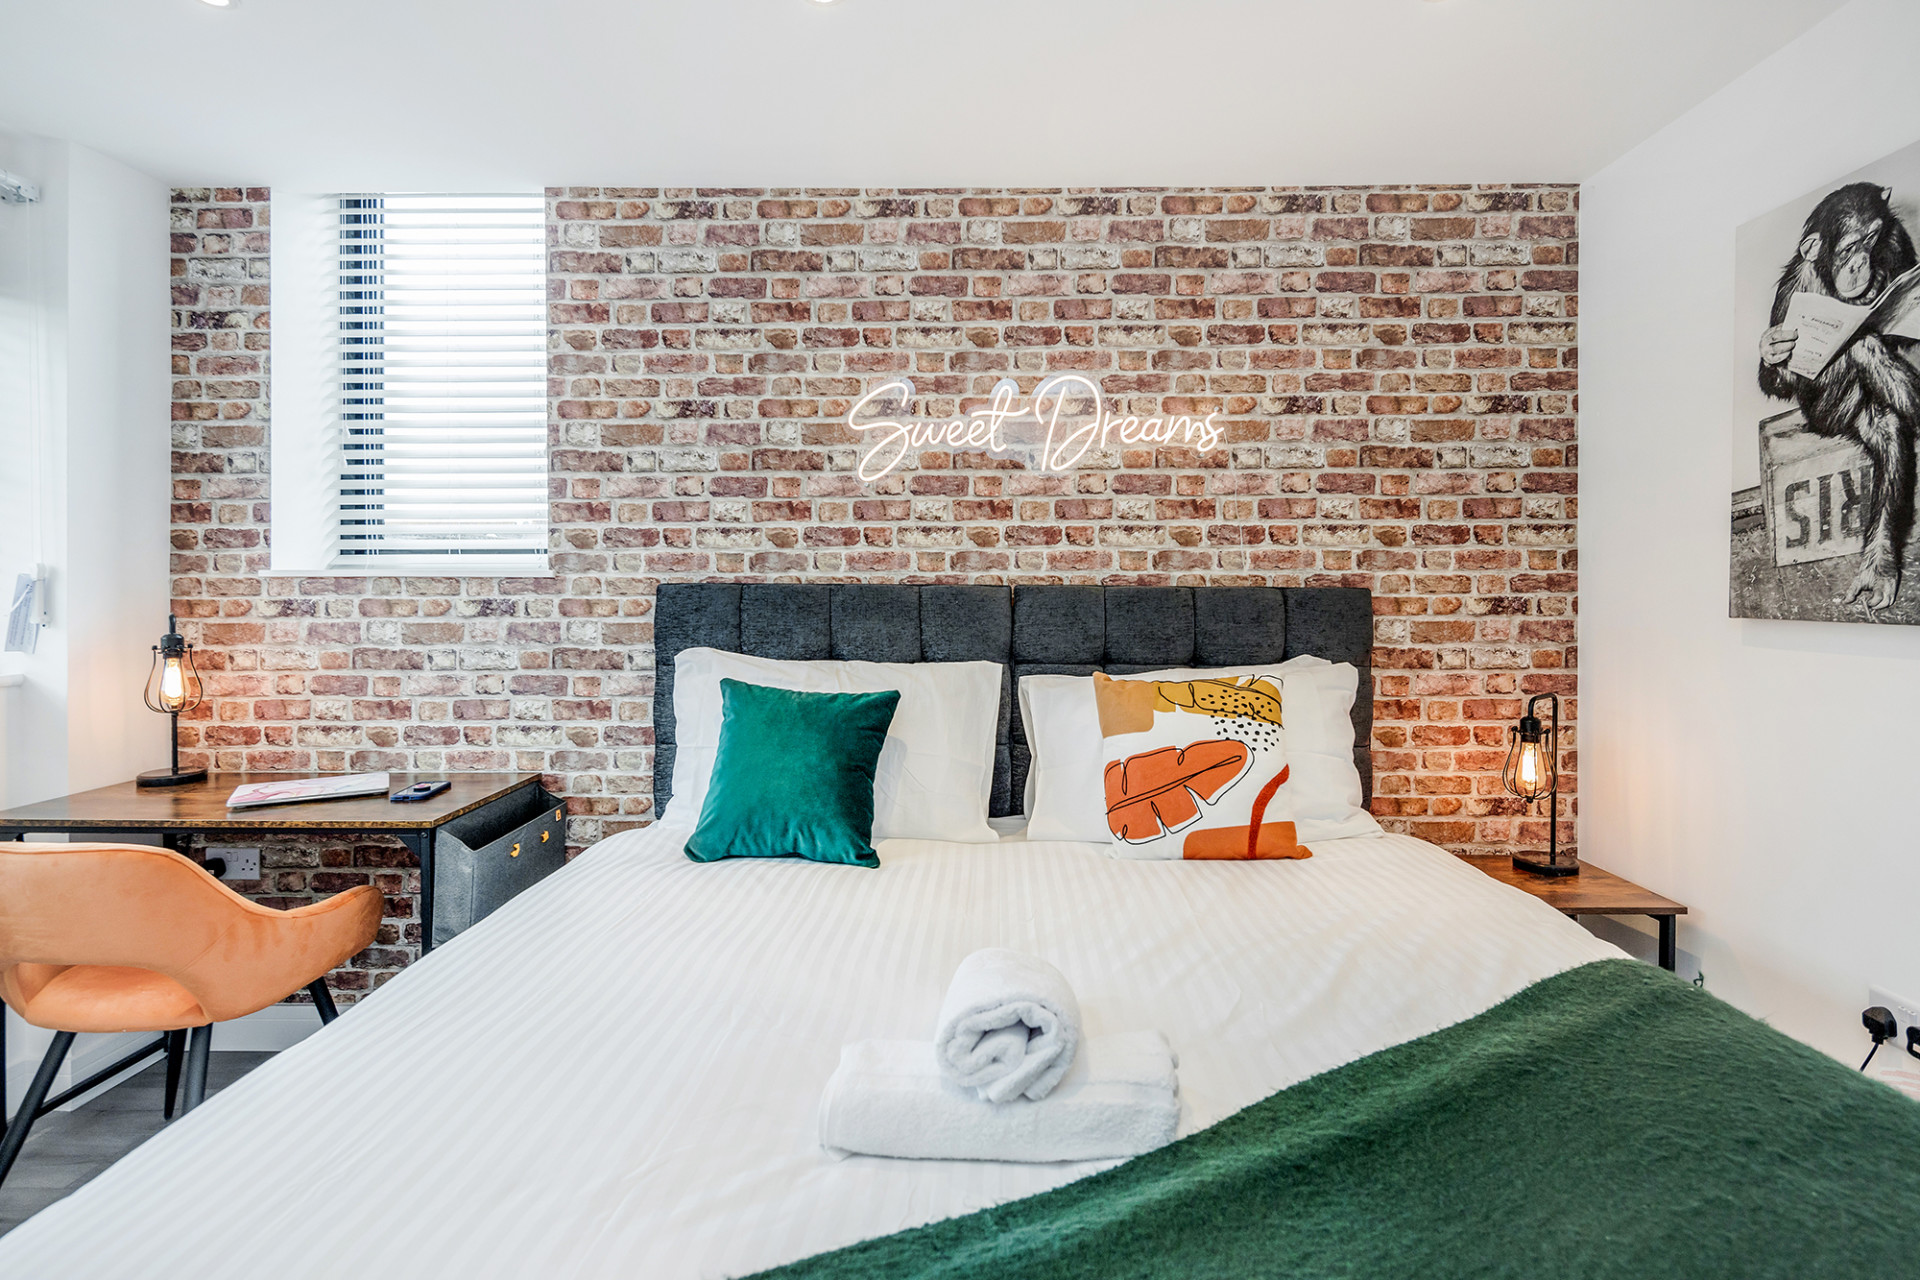 Heliodoor Serviced Apartments | The freedom of serviced accommodation when you're working away